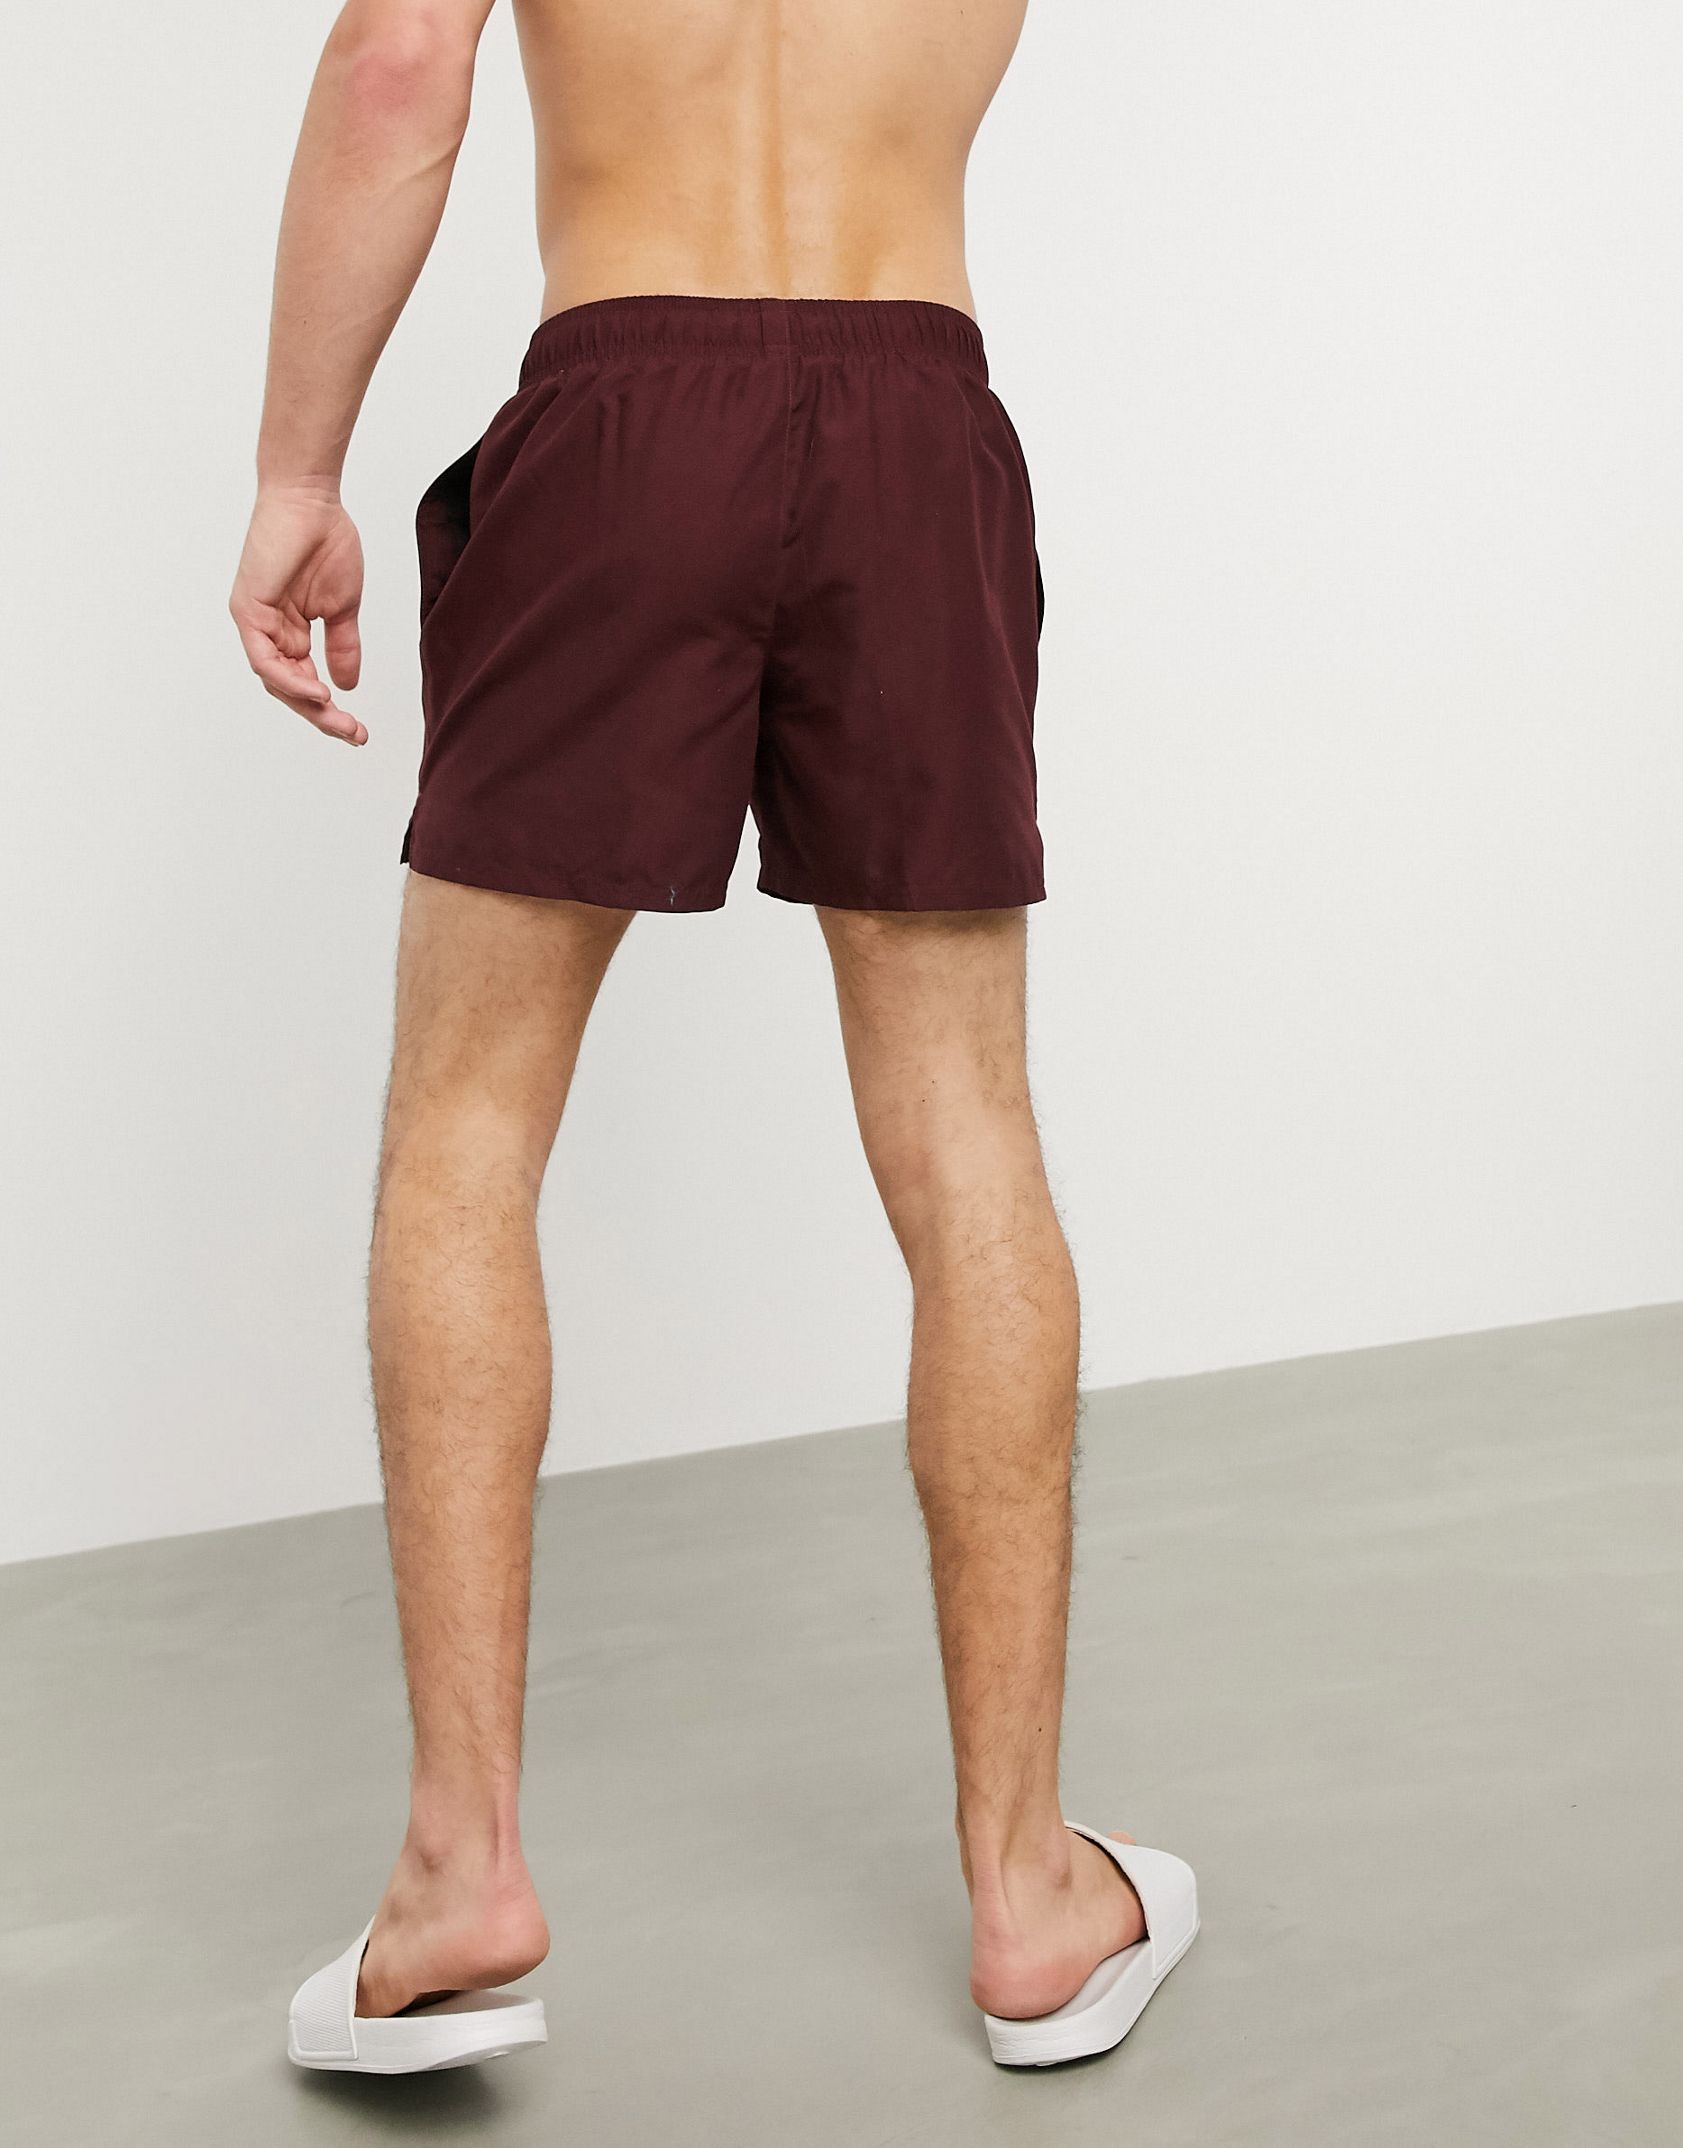 Nike Swimming 5inch Volley shorts in burgundy